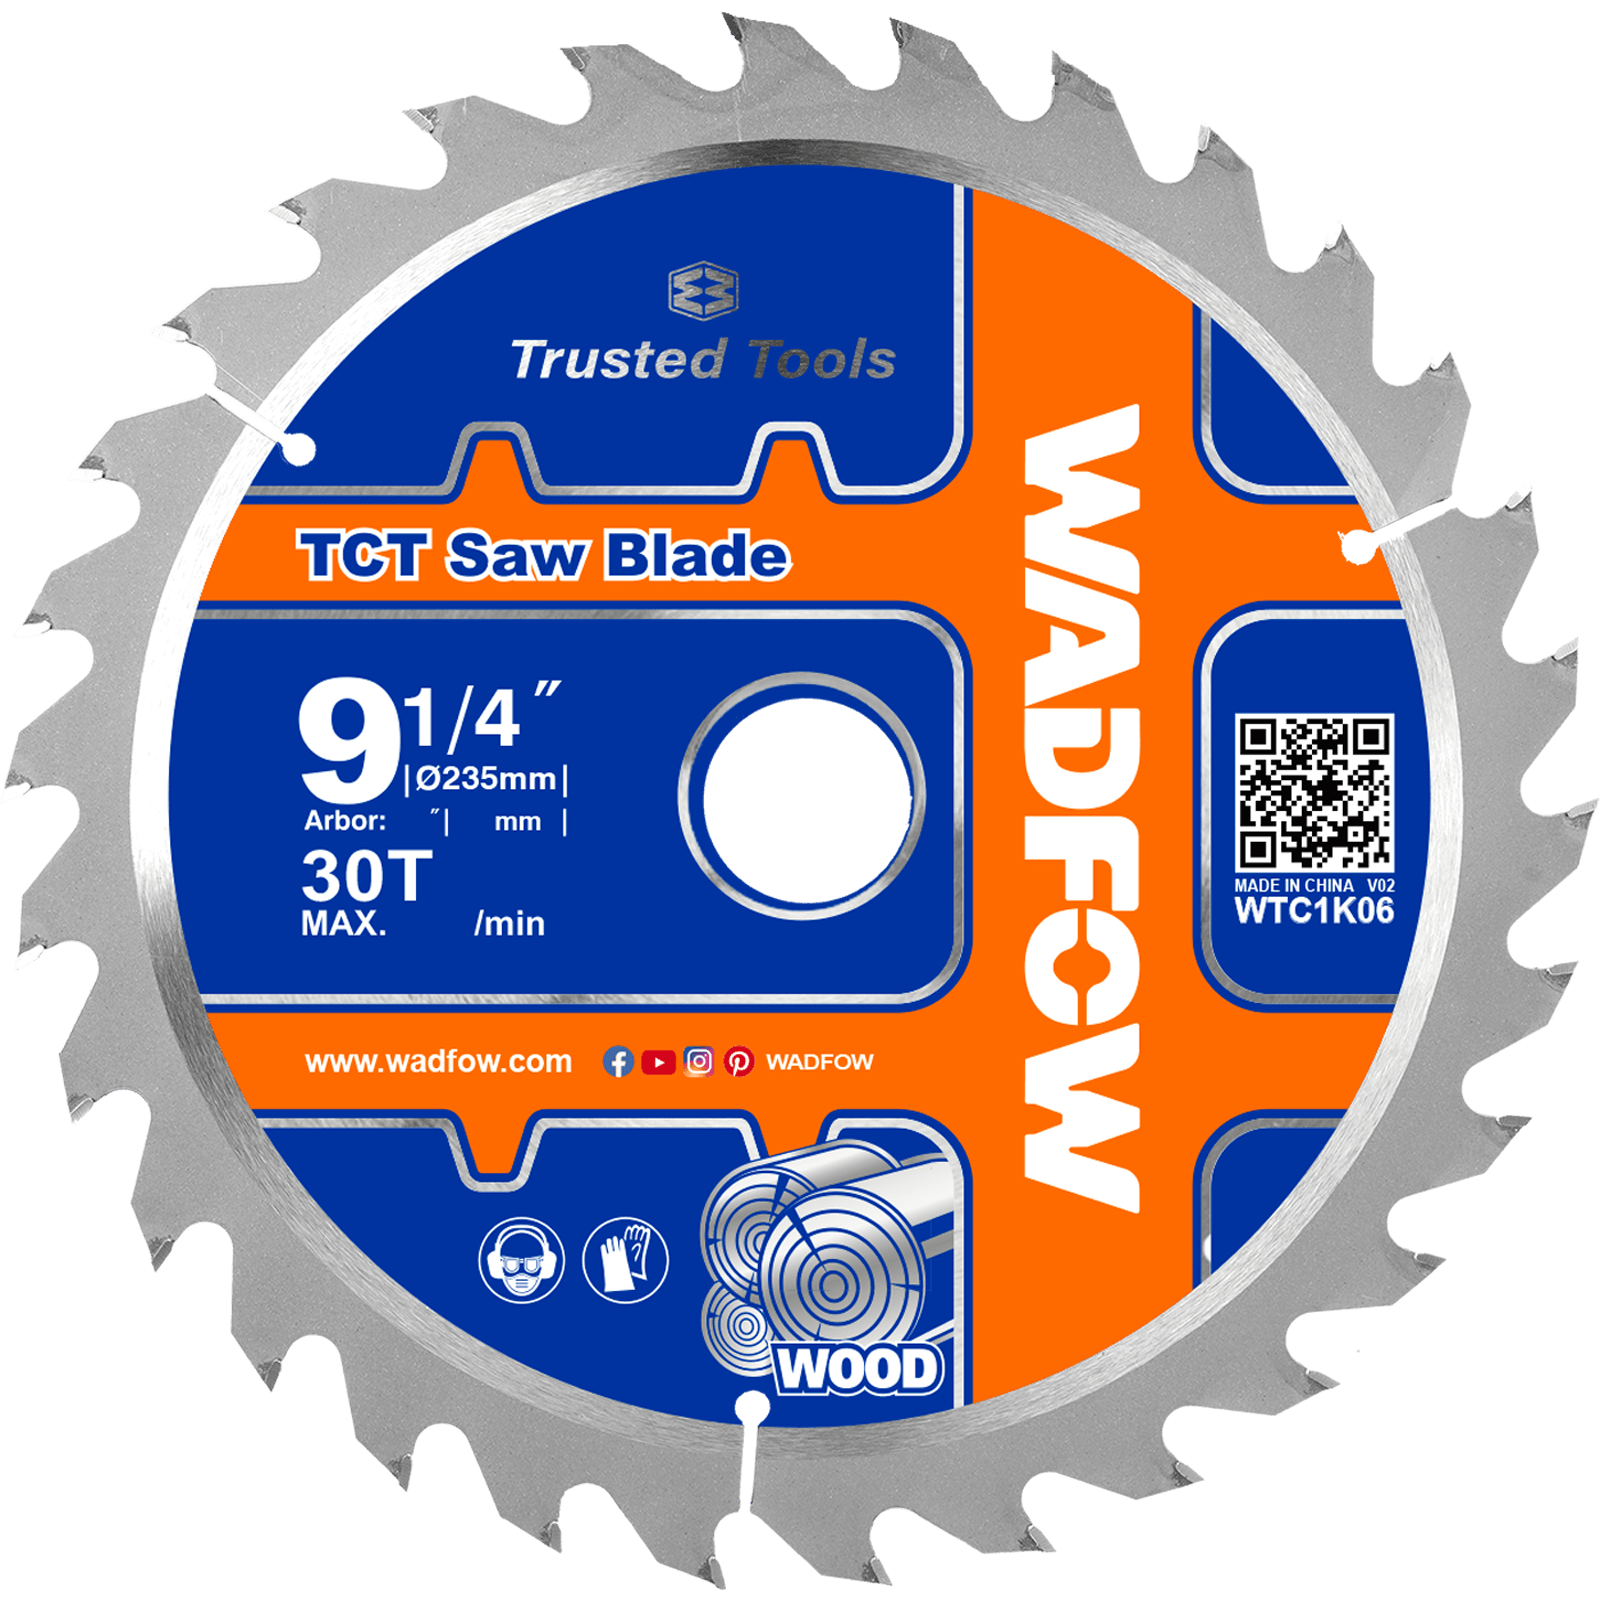 Buy Wadfow TCT Saw Blade 235mm Online in Accra, Ghana | Supply Master Grinding & Cutting Wheels Buy Tools hardware Building materials